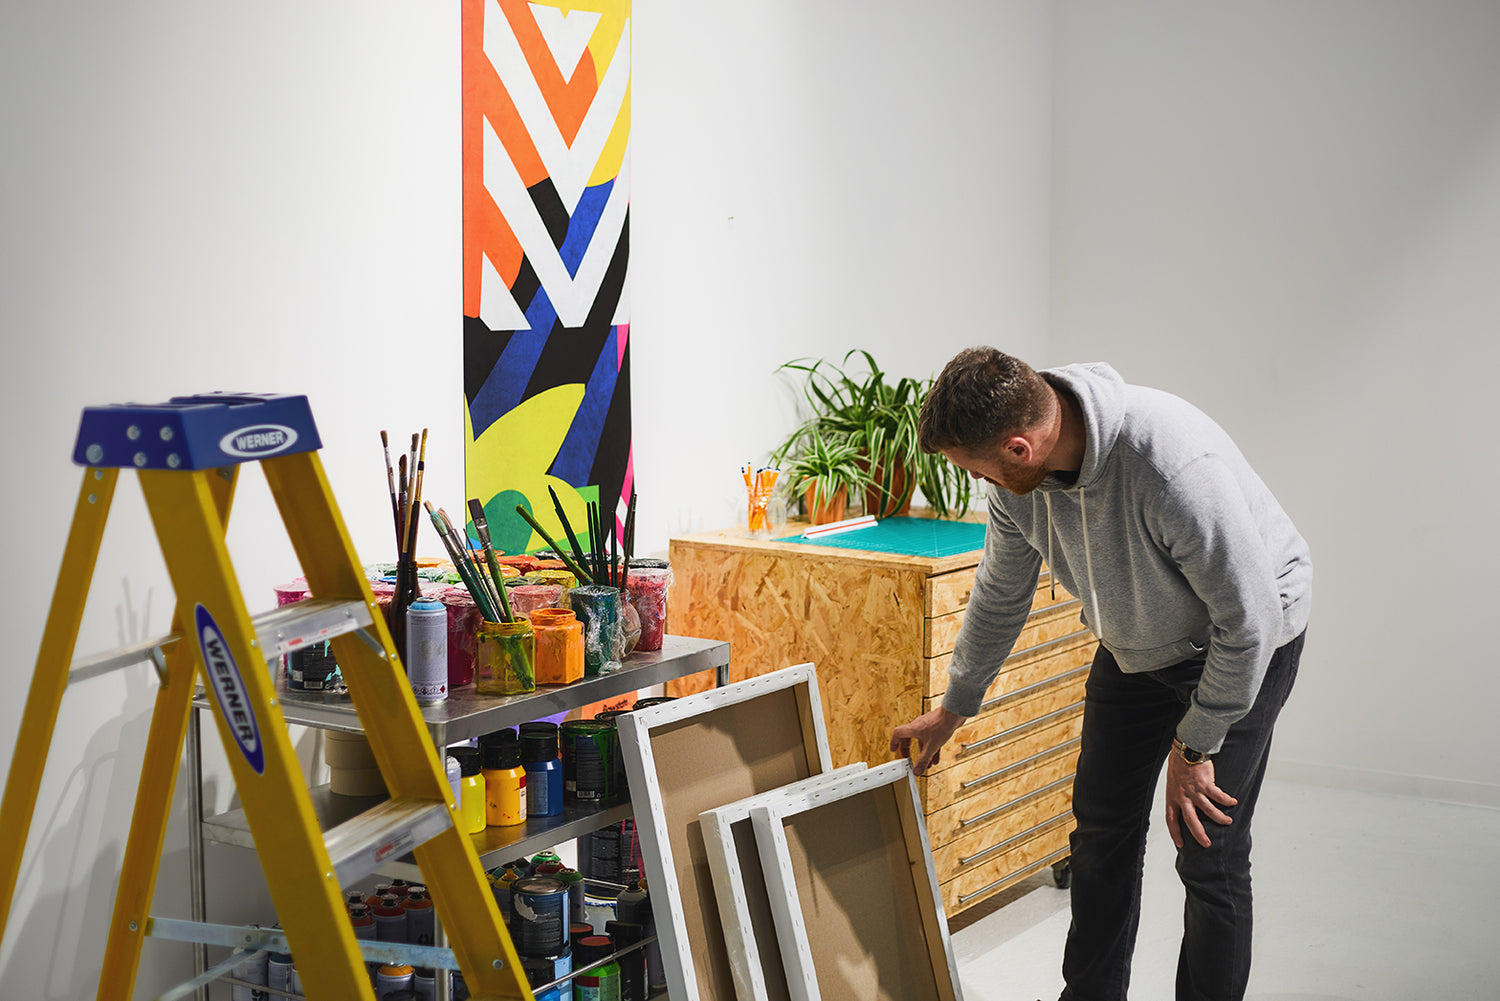 Maser in his studio with a Flowstate yoga mat handing on the wall nearby